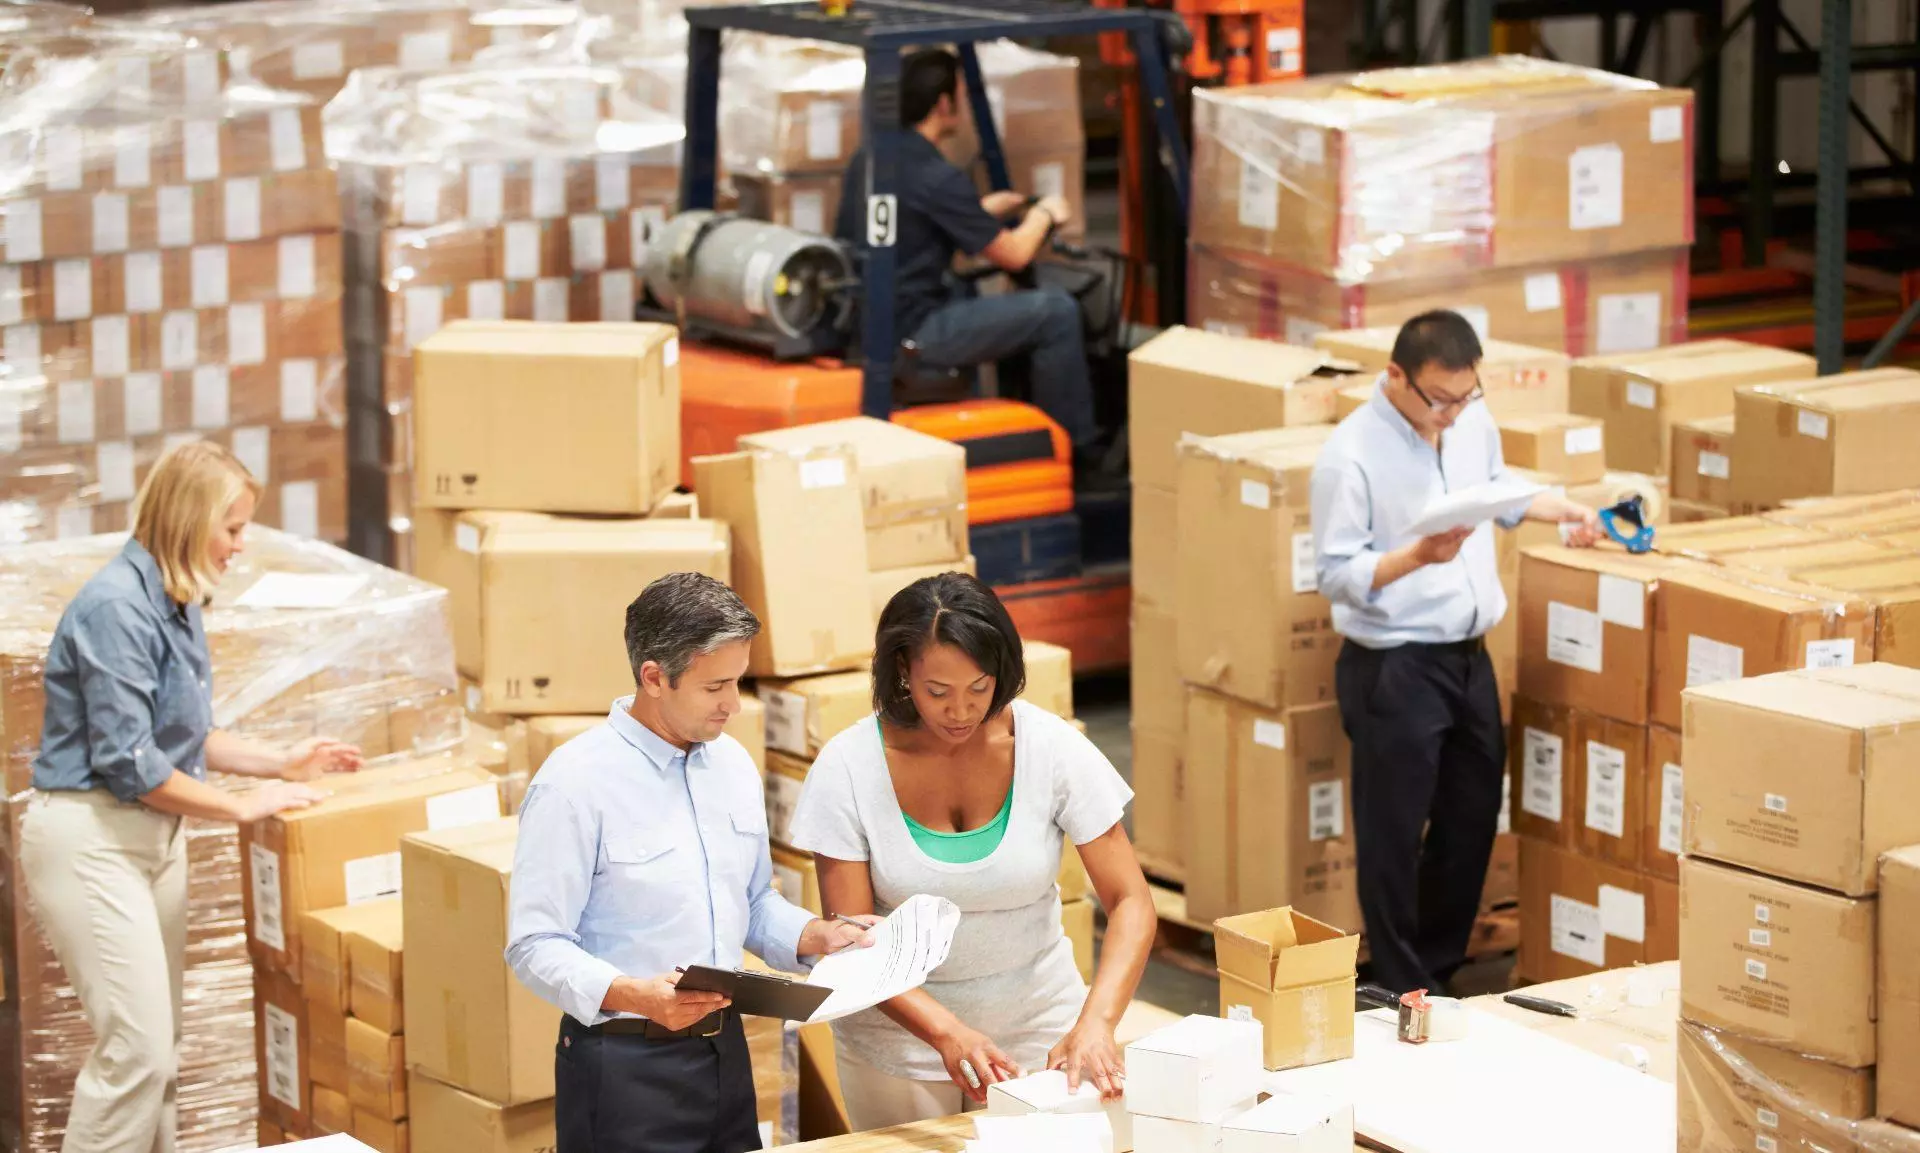 Why outsourcing warehouse ops to right 3PL partner key differentiator